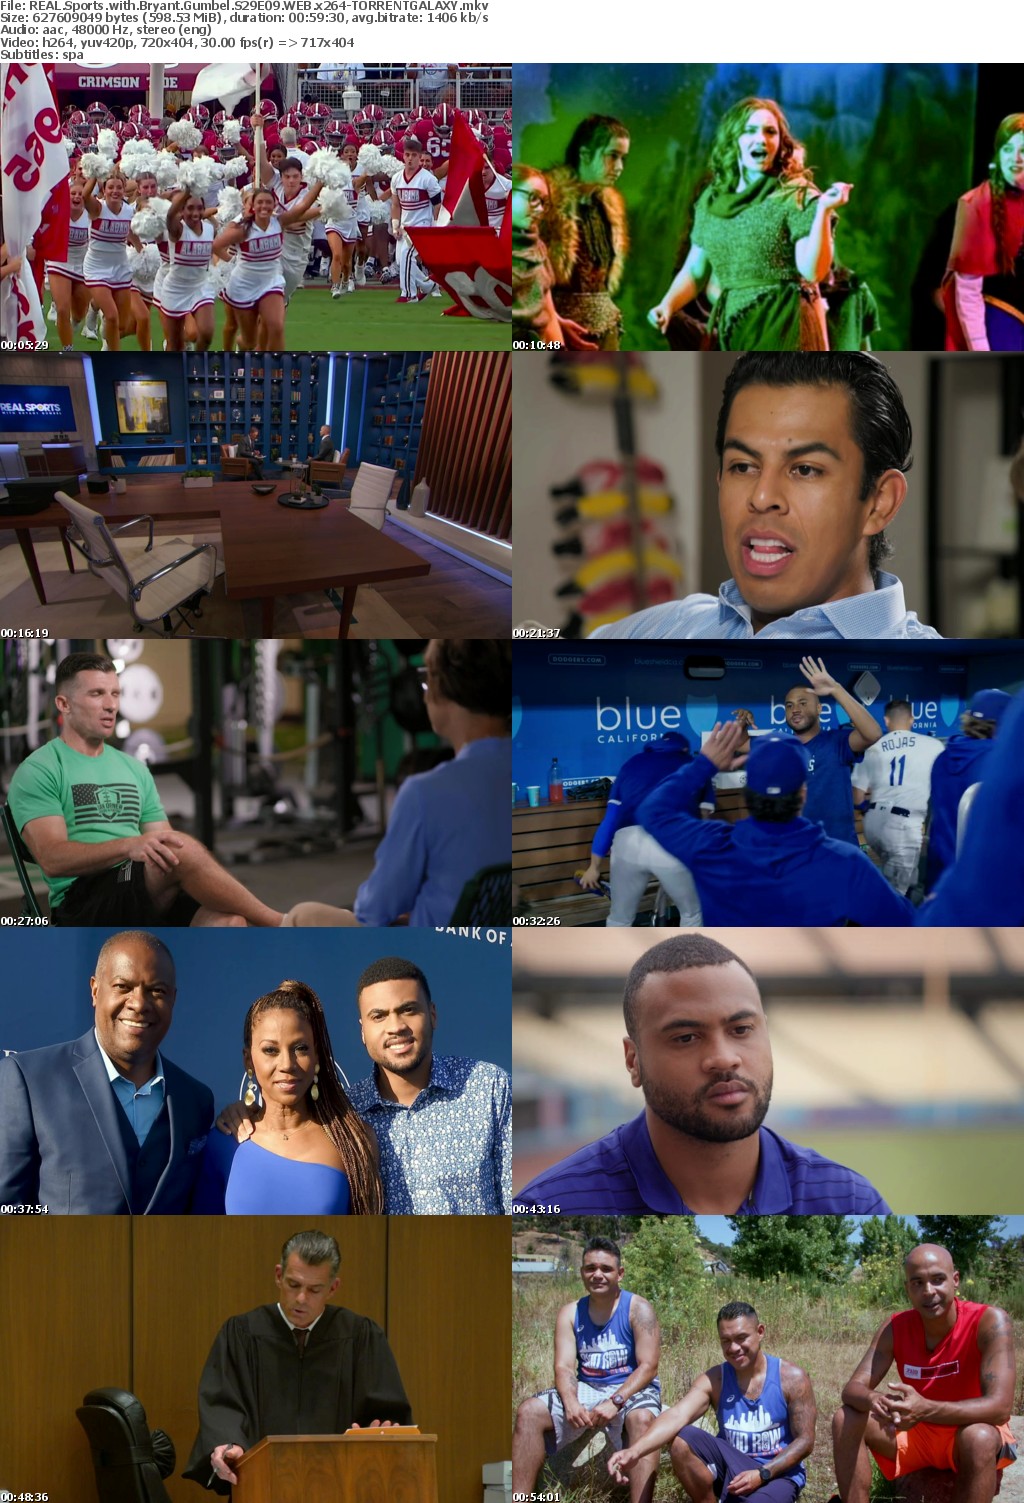 REAL Sports with Bryant Gumbel S29E09 WEB x264-GALAXY